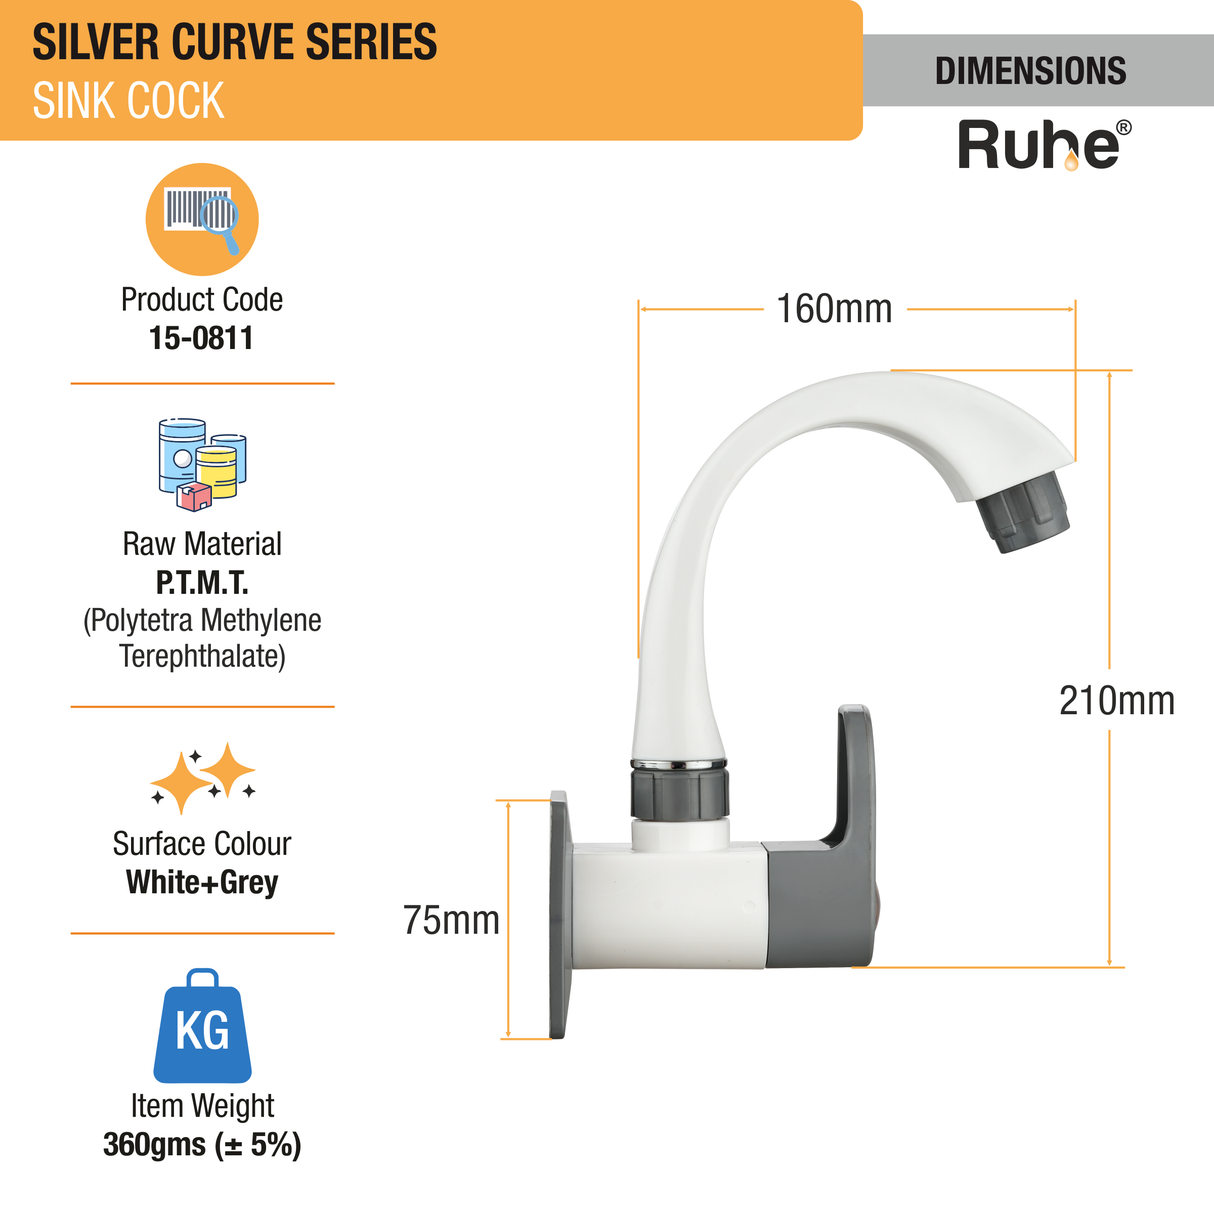 Silver Curve Sink Tap with Swivel Spout PTMT Faucet dimensions and sizes